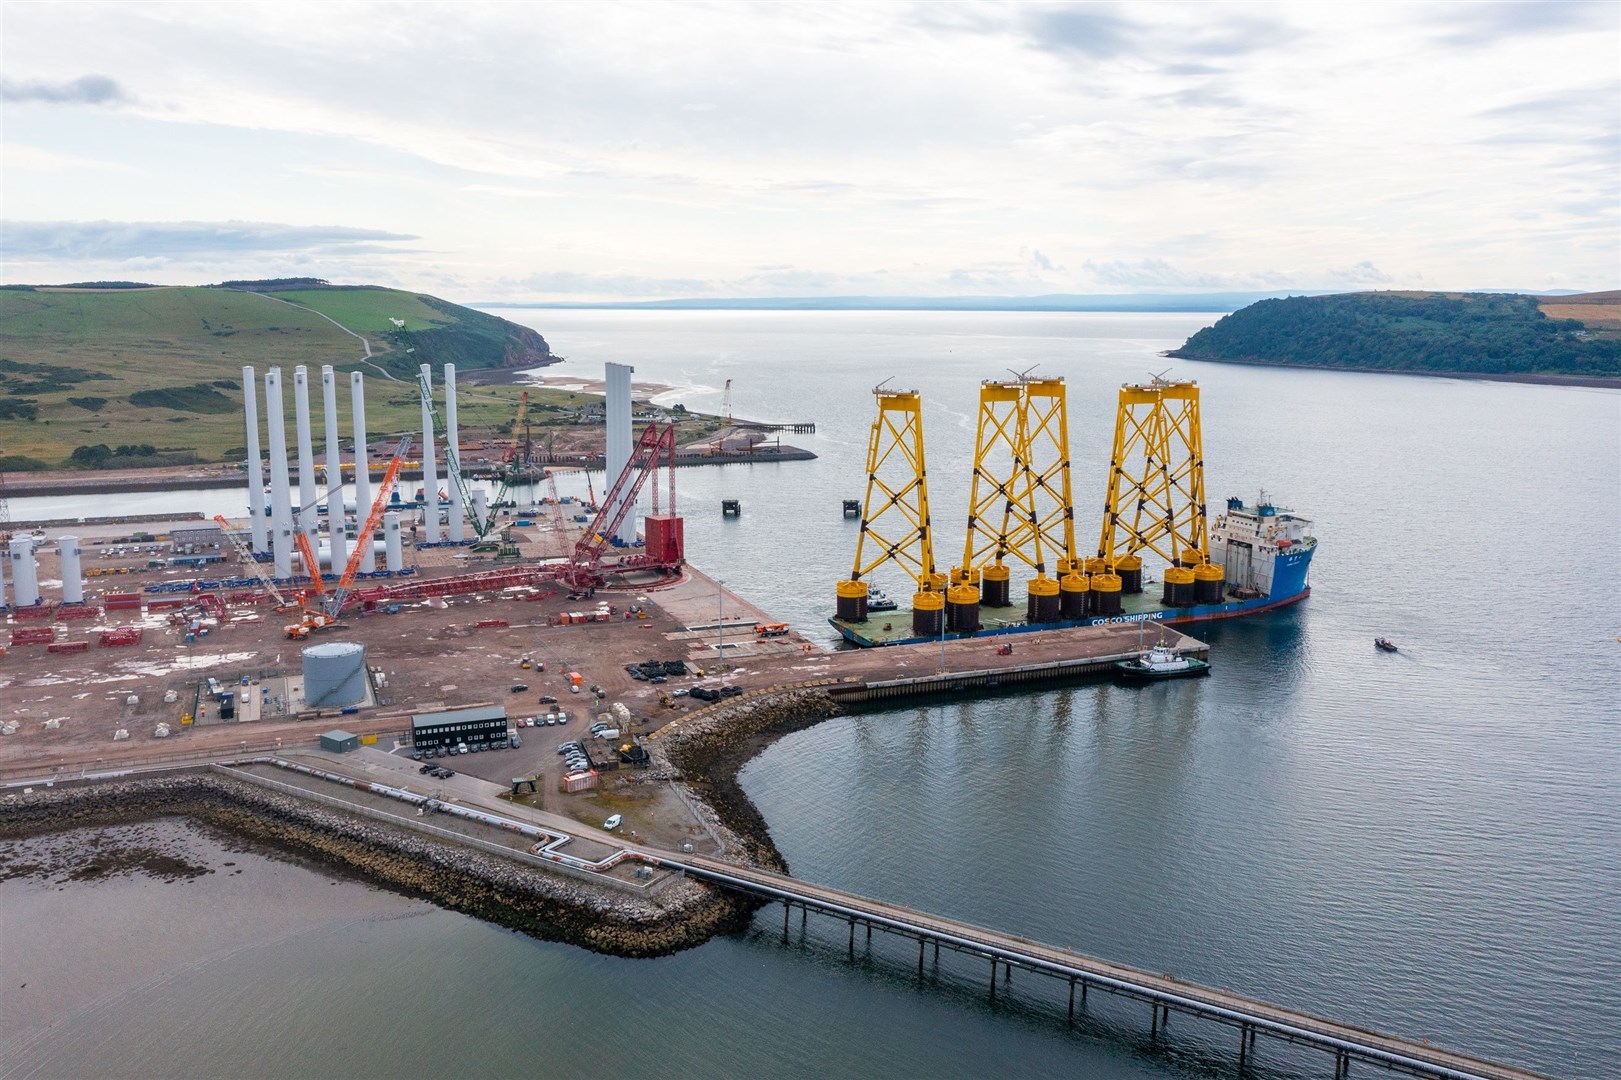 The installation of all 114 wind turbine foundations for the Seagreen Offshore Wind Farm will support up to 141 skilled jobs at Nigg. Picture credit: Seagreen Offshore Wind Farm